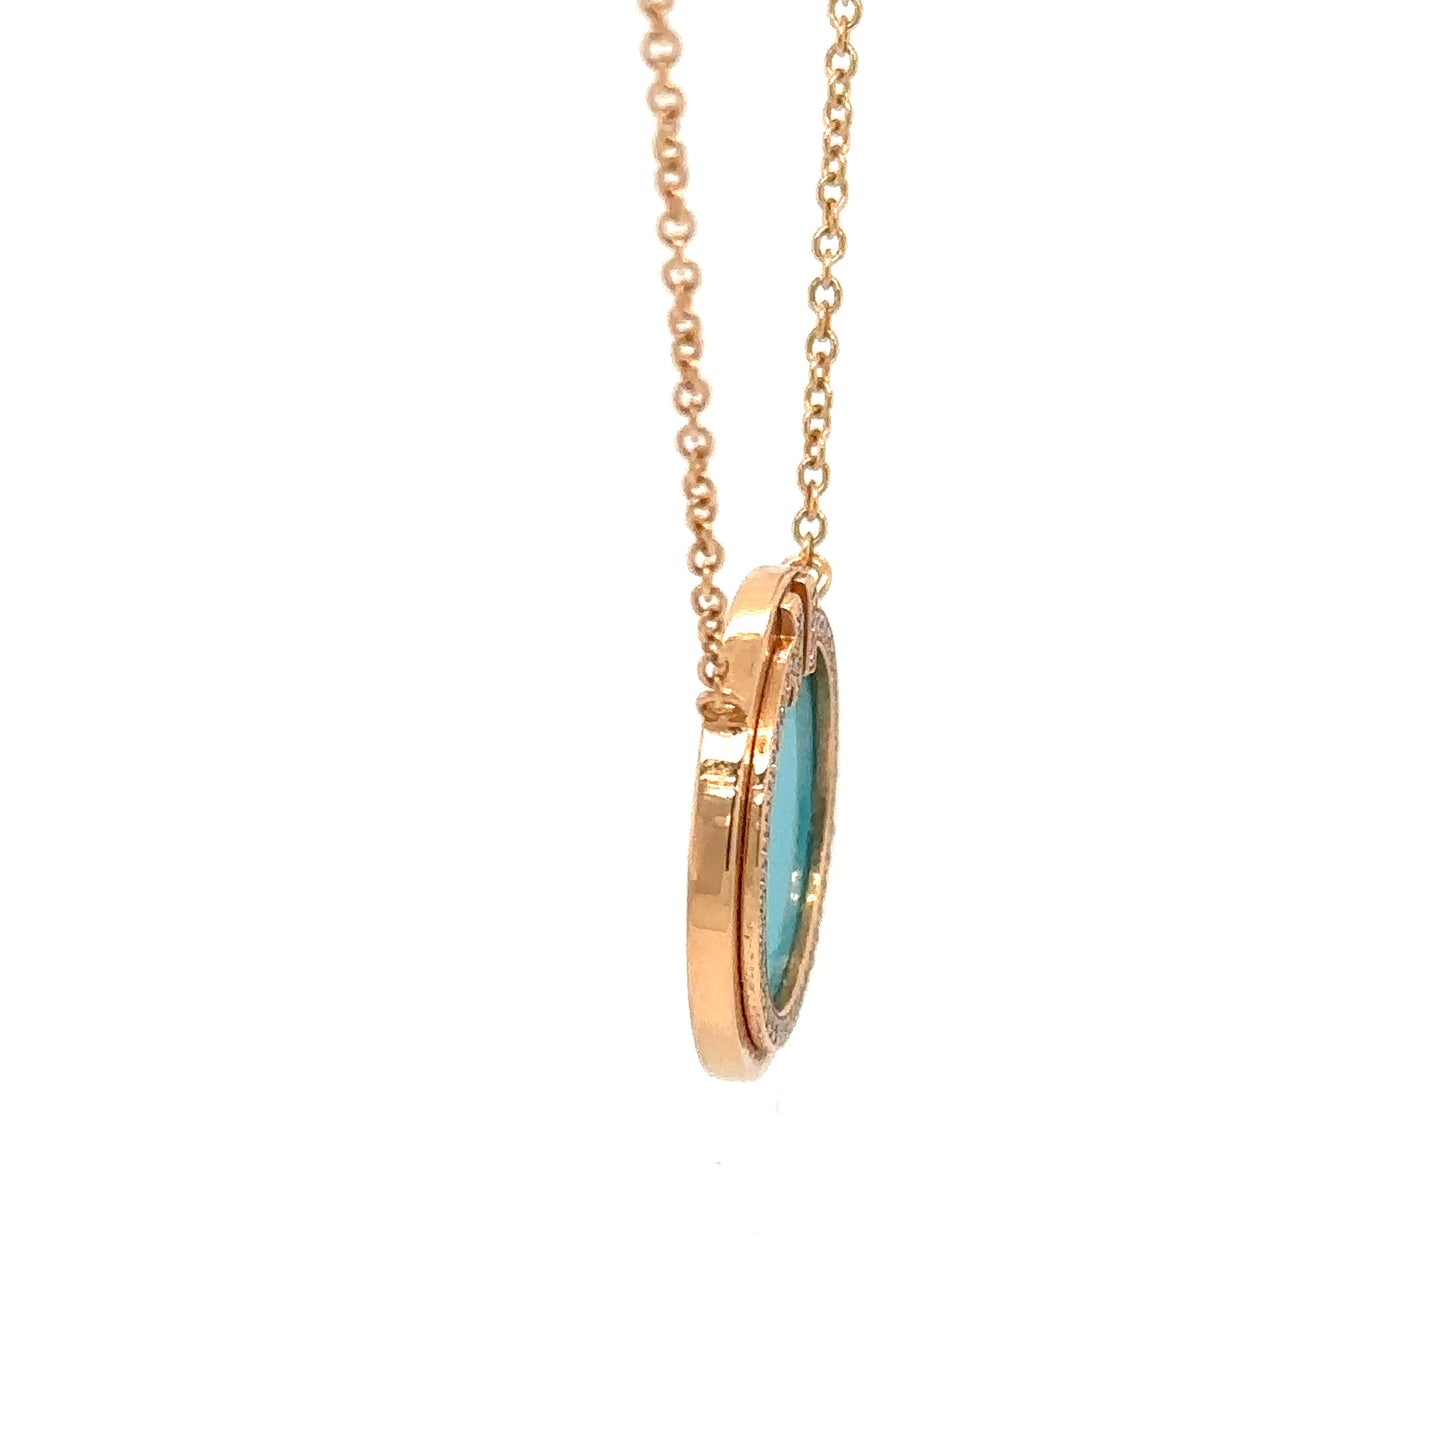 Tiffany & Co. T Turquoise Pendant with Diamonds in 18K Rose Gold